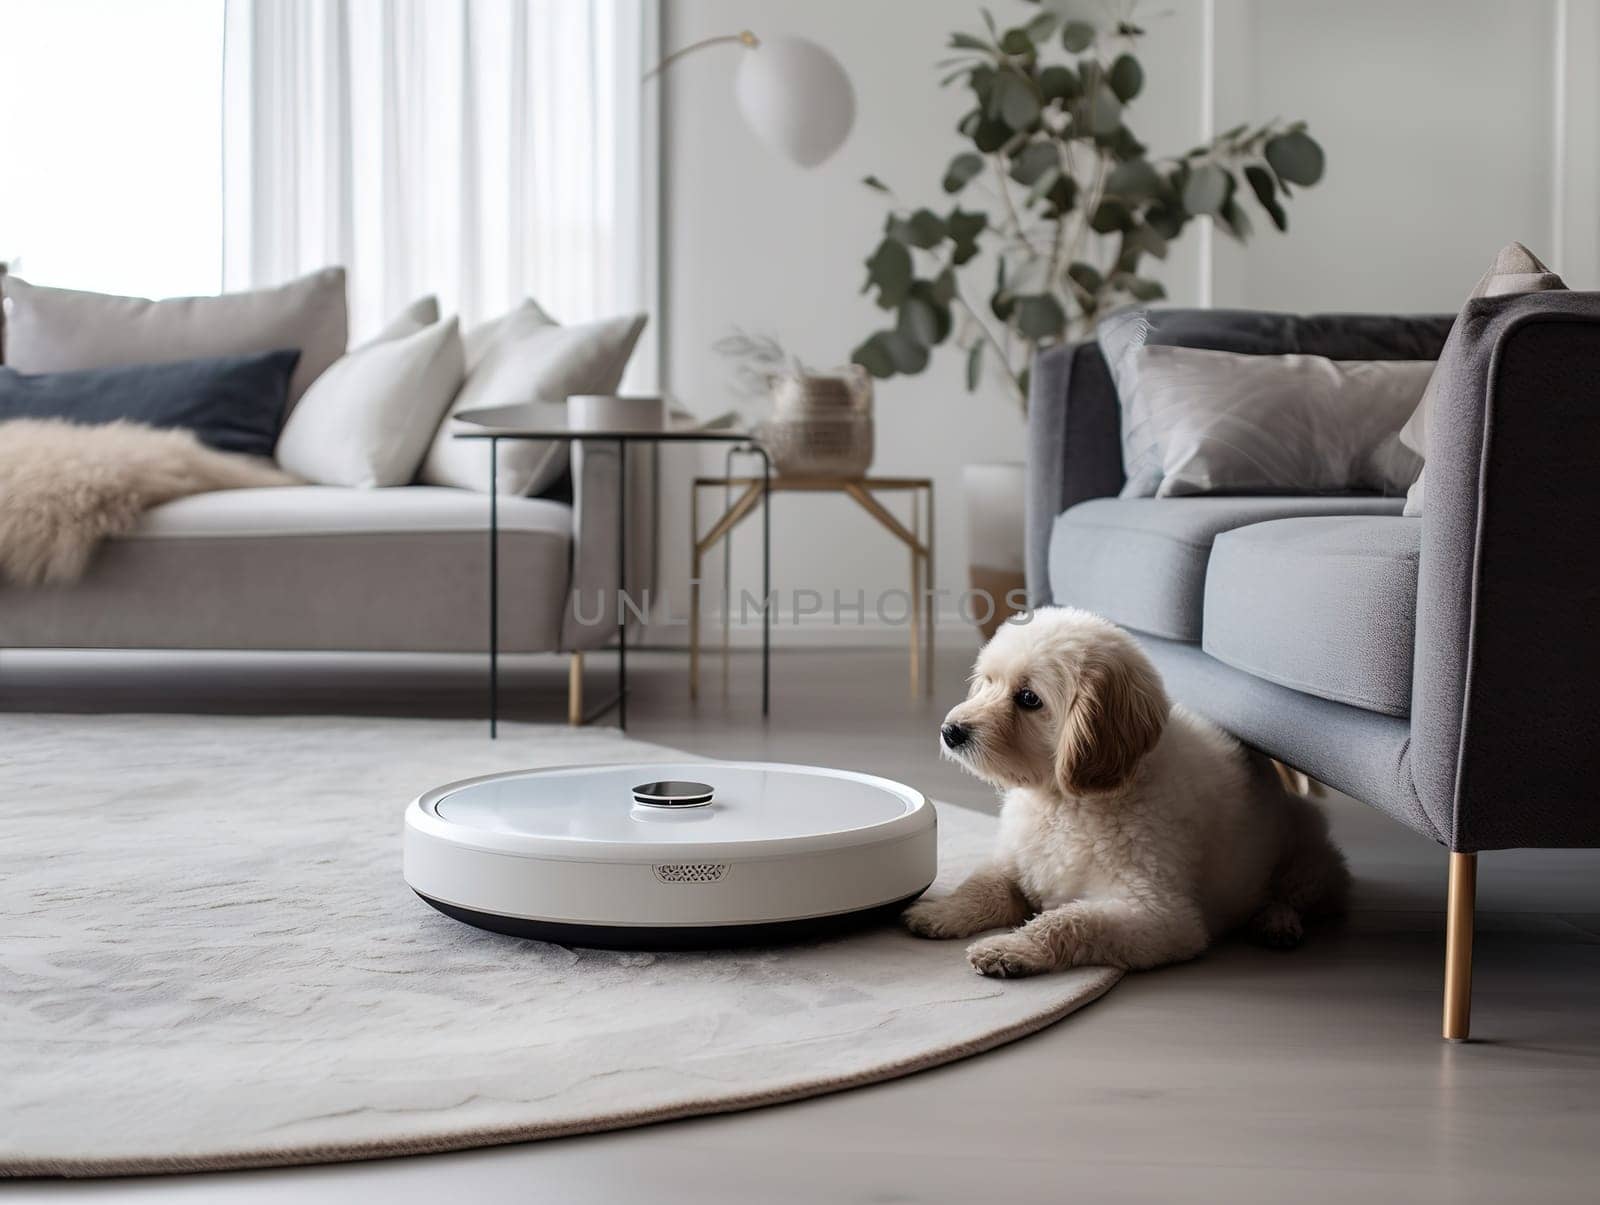 Cute Dog And Wireless Vacuum Cleaner Cleaning A Floor by GekaSkr